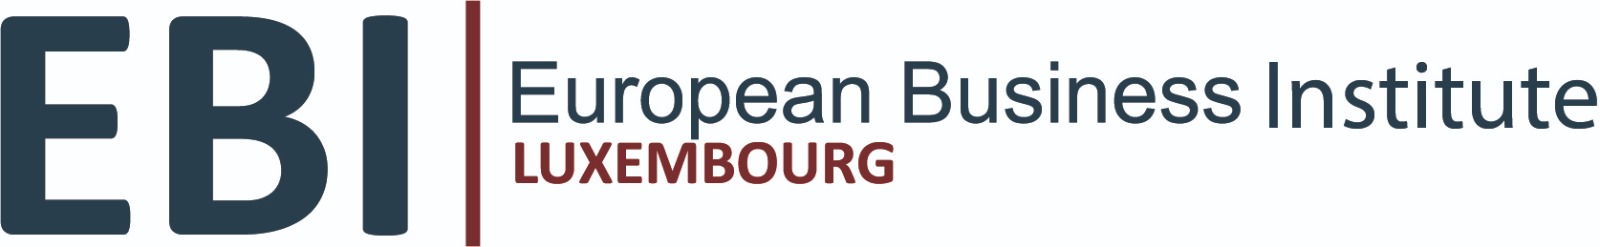 European Business Institute of Luxembourg